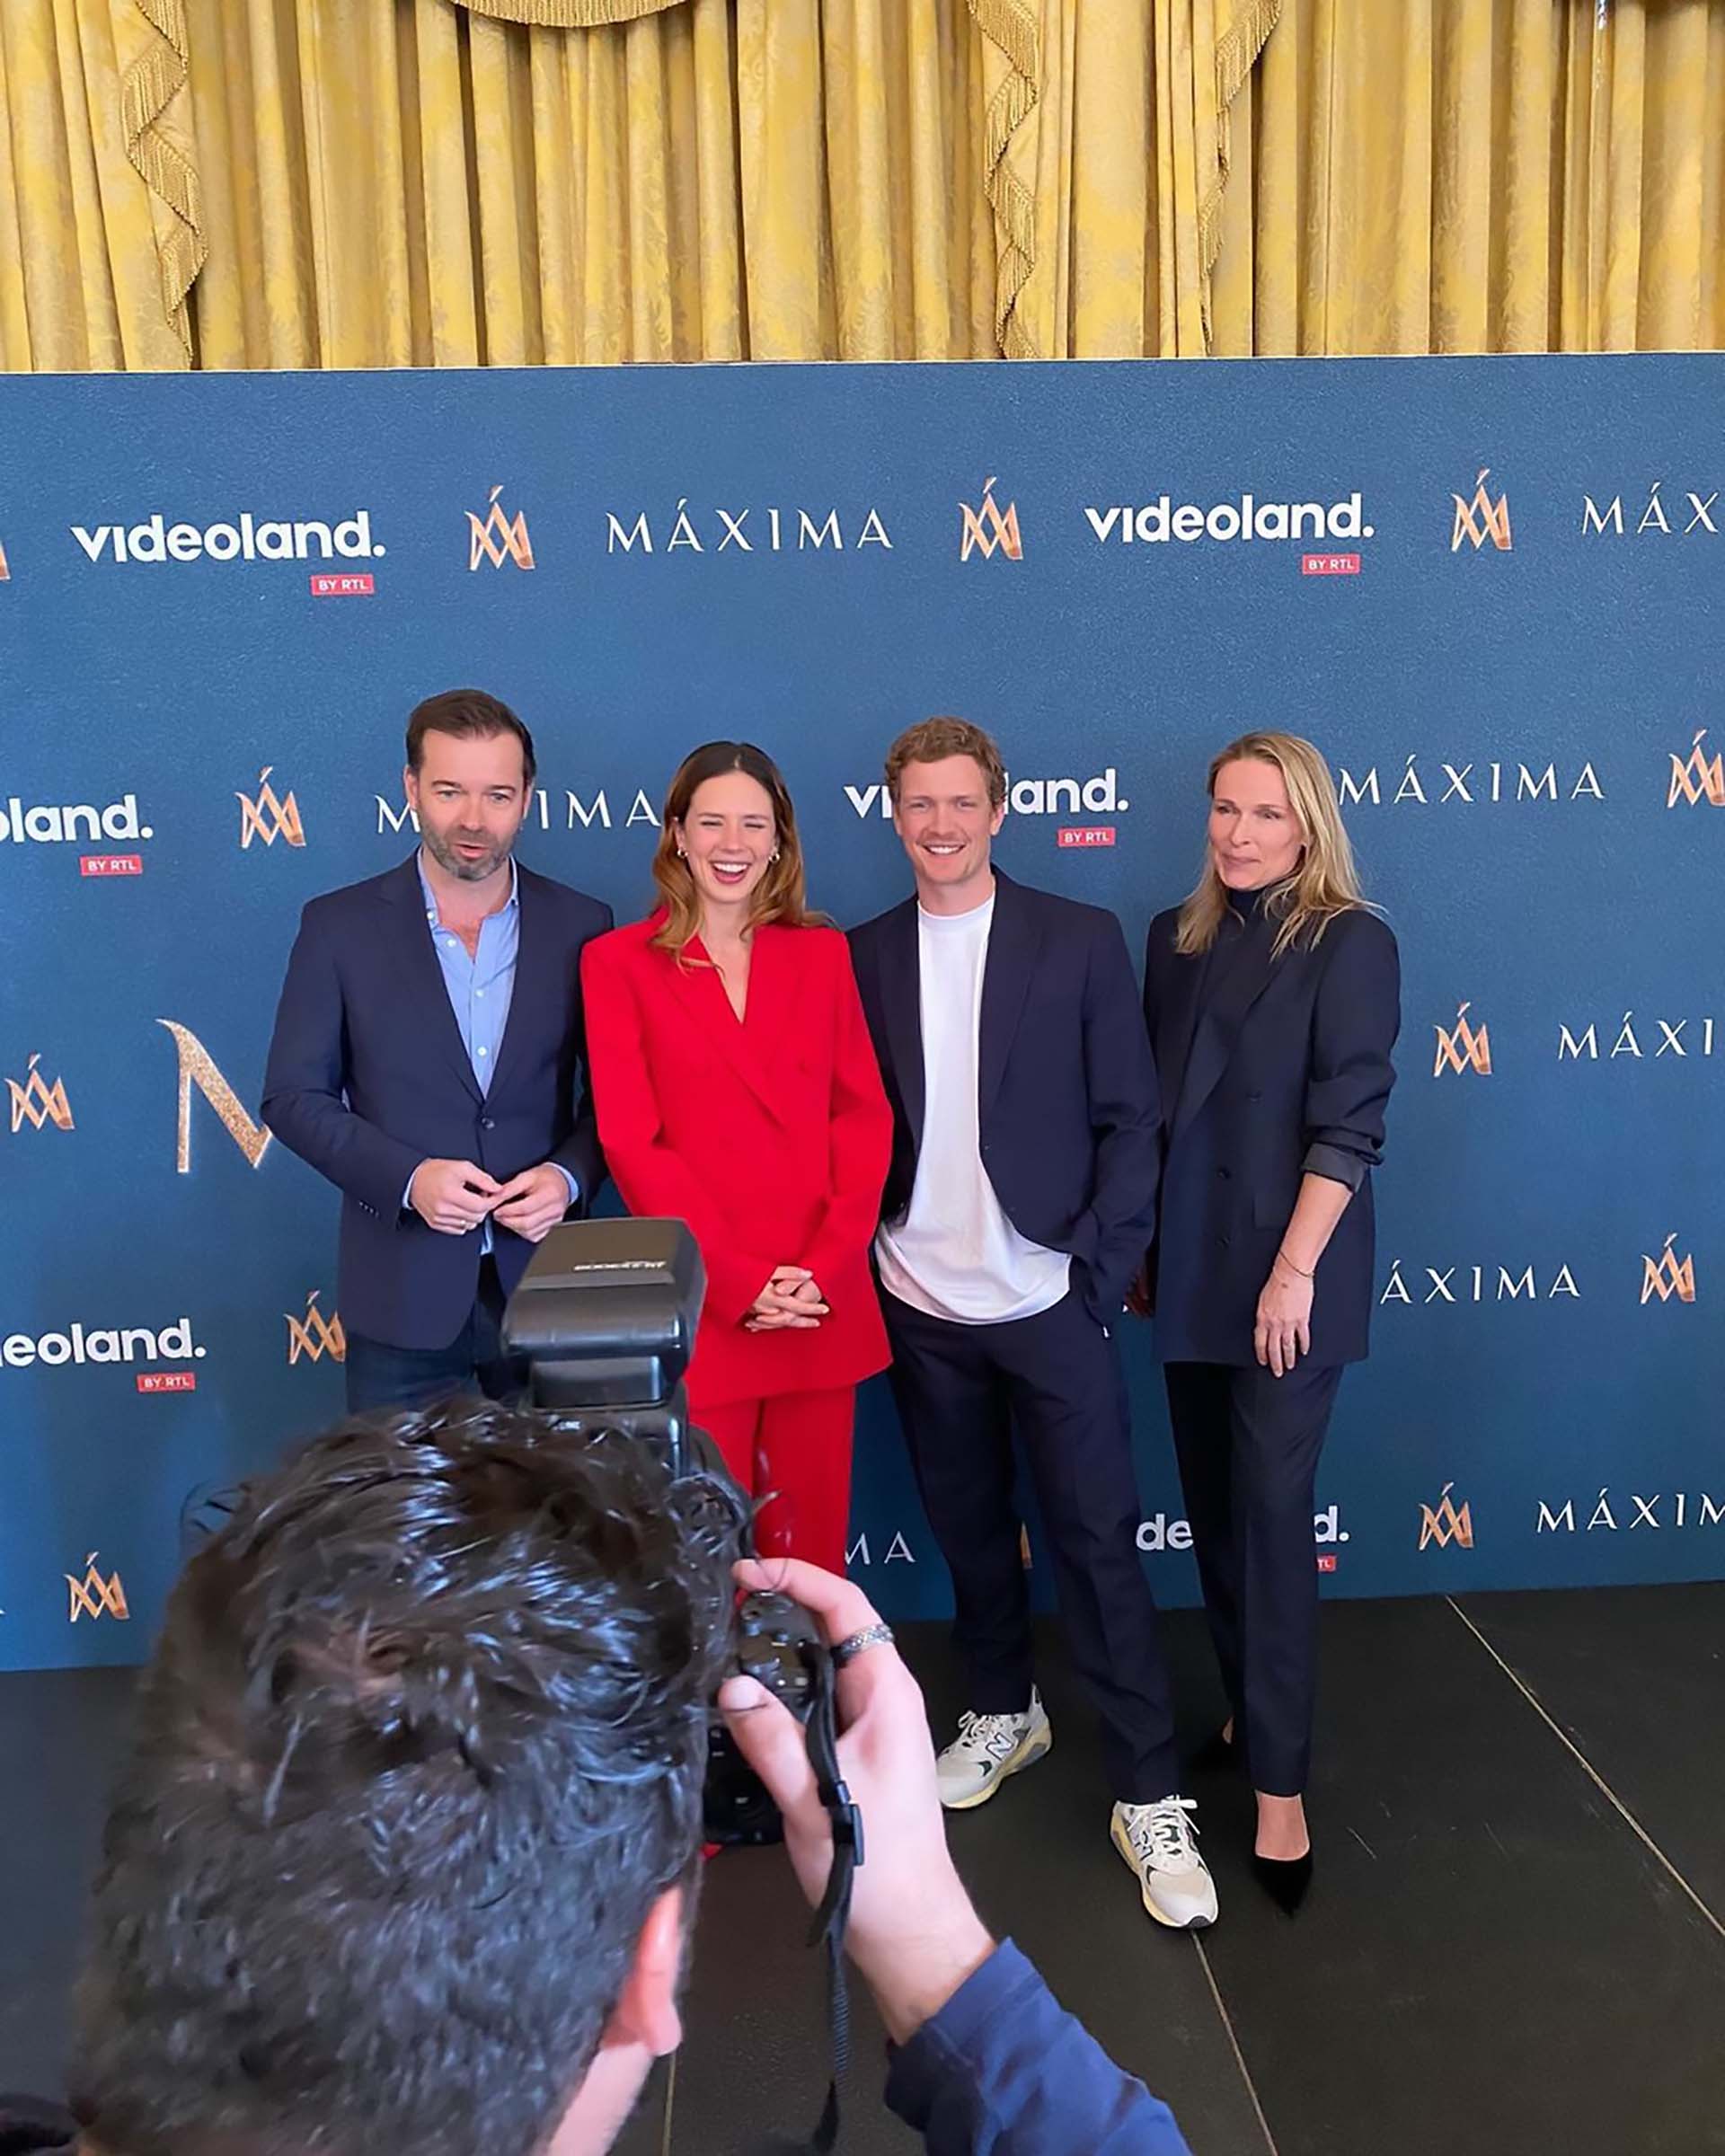 Delfina Chaves in the presentation of the Máxima series (@delfichaves)